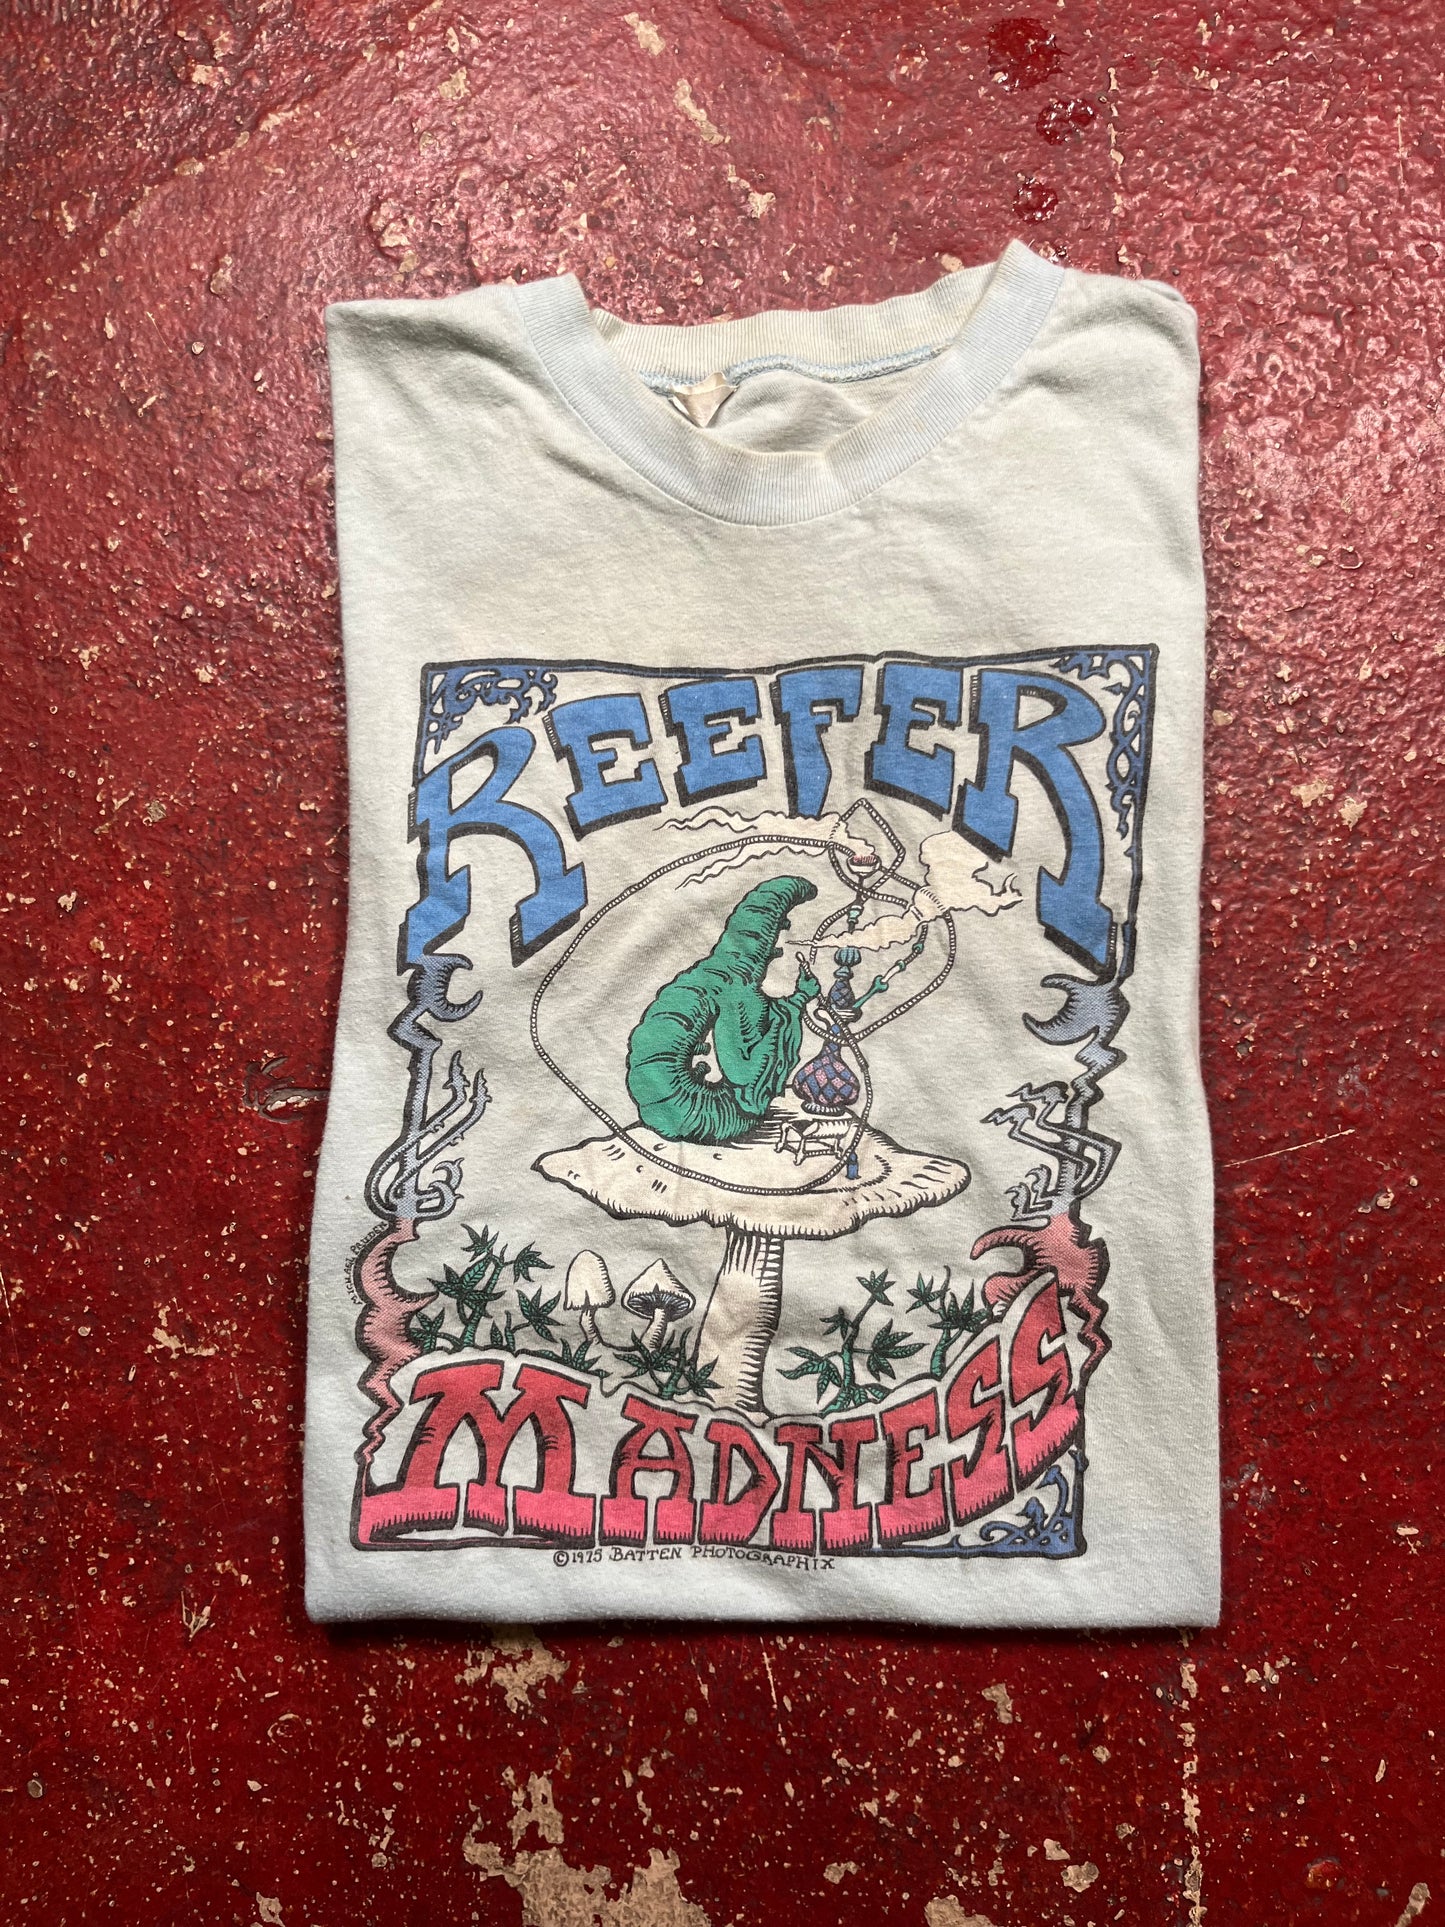 1975 Reefer Madness Tee